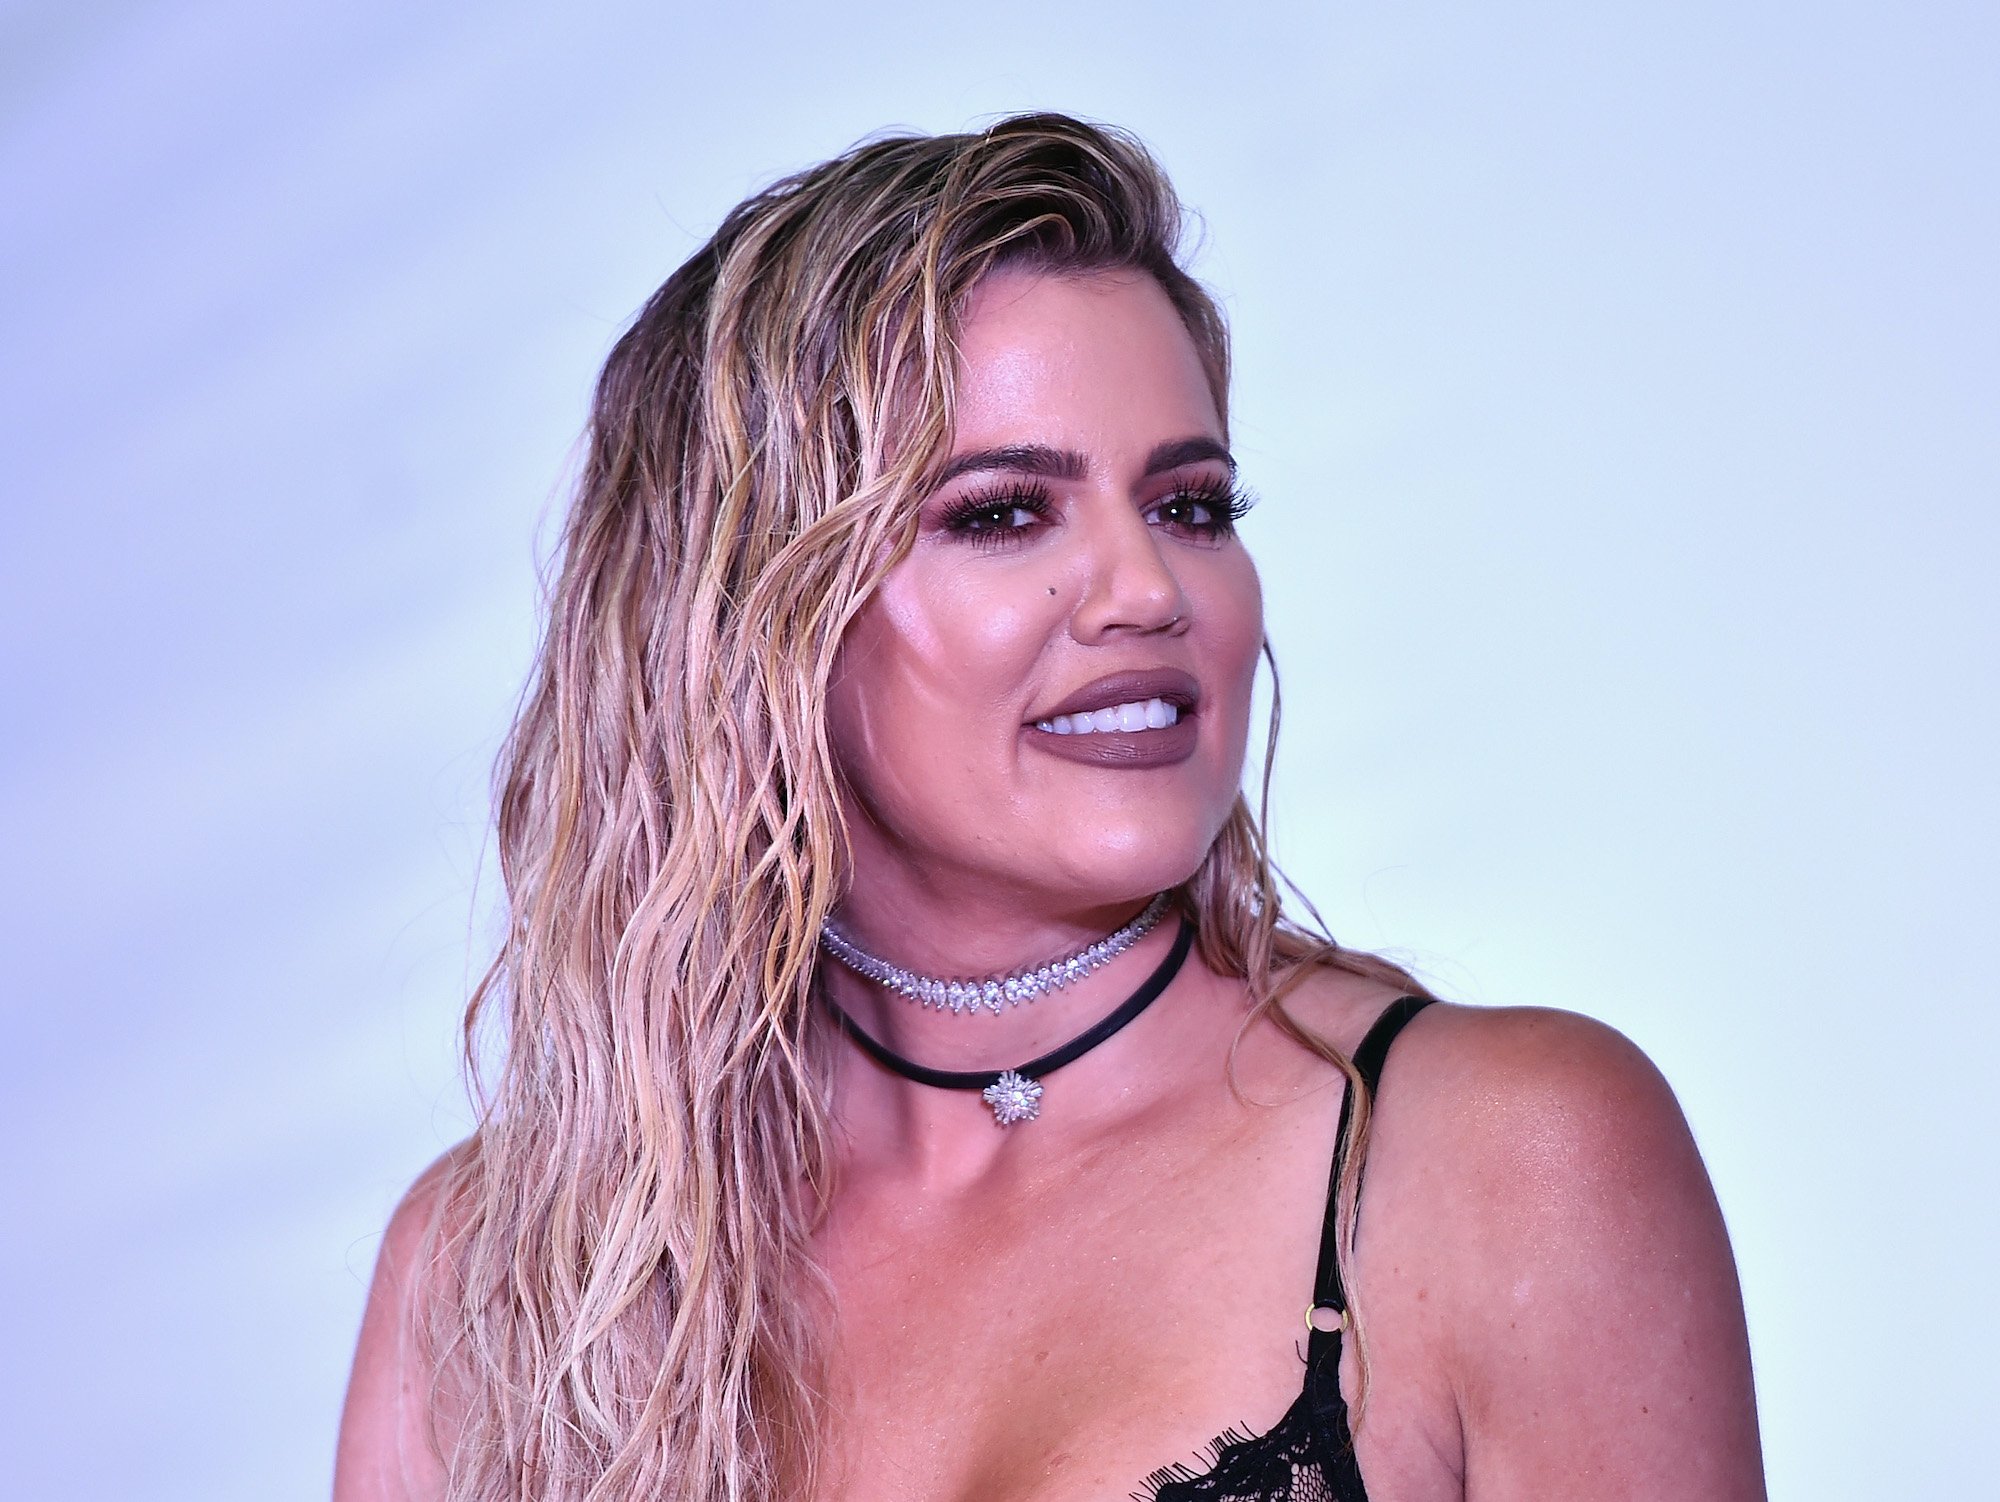 Some Khloé Kardashian Fans ‘Do Not Feel Bad’ For Her Anymore: ‘She Brings This All on Herself’